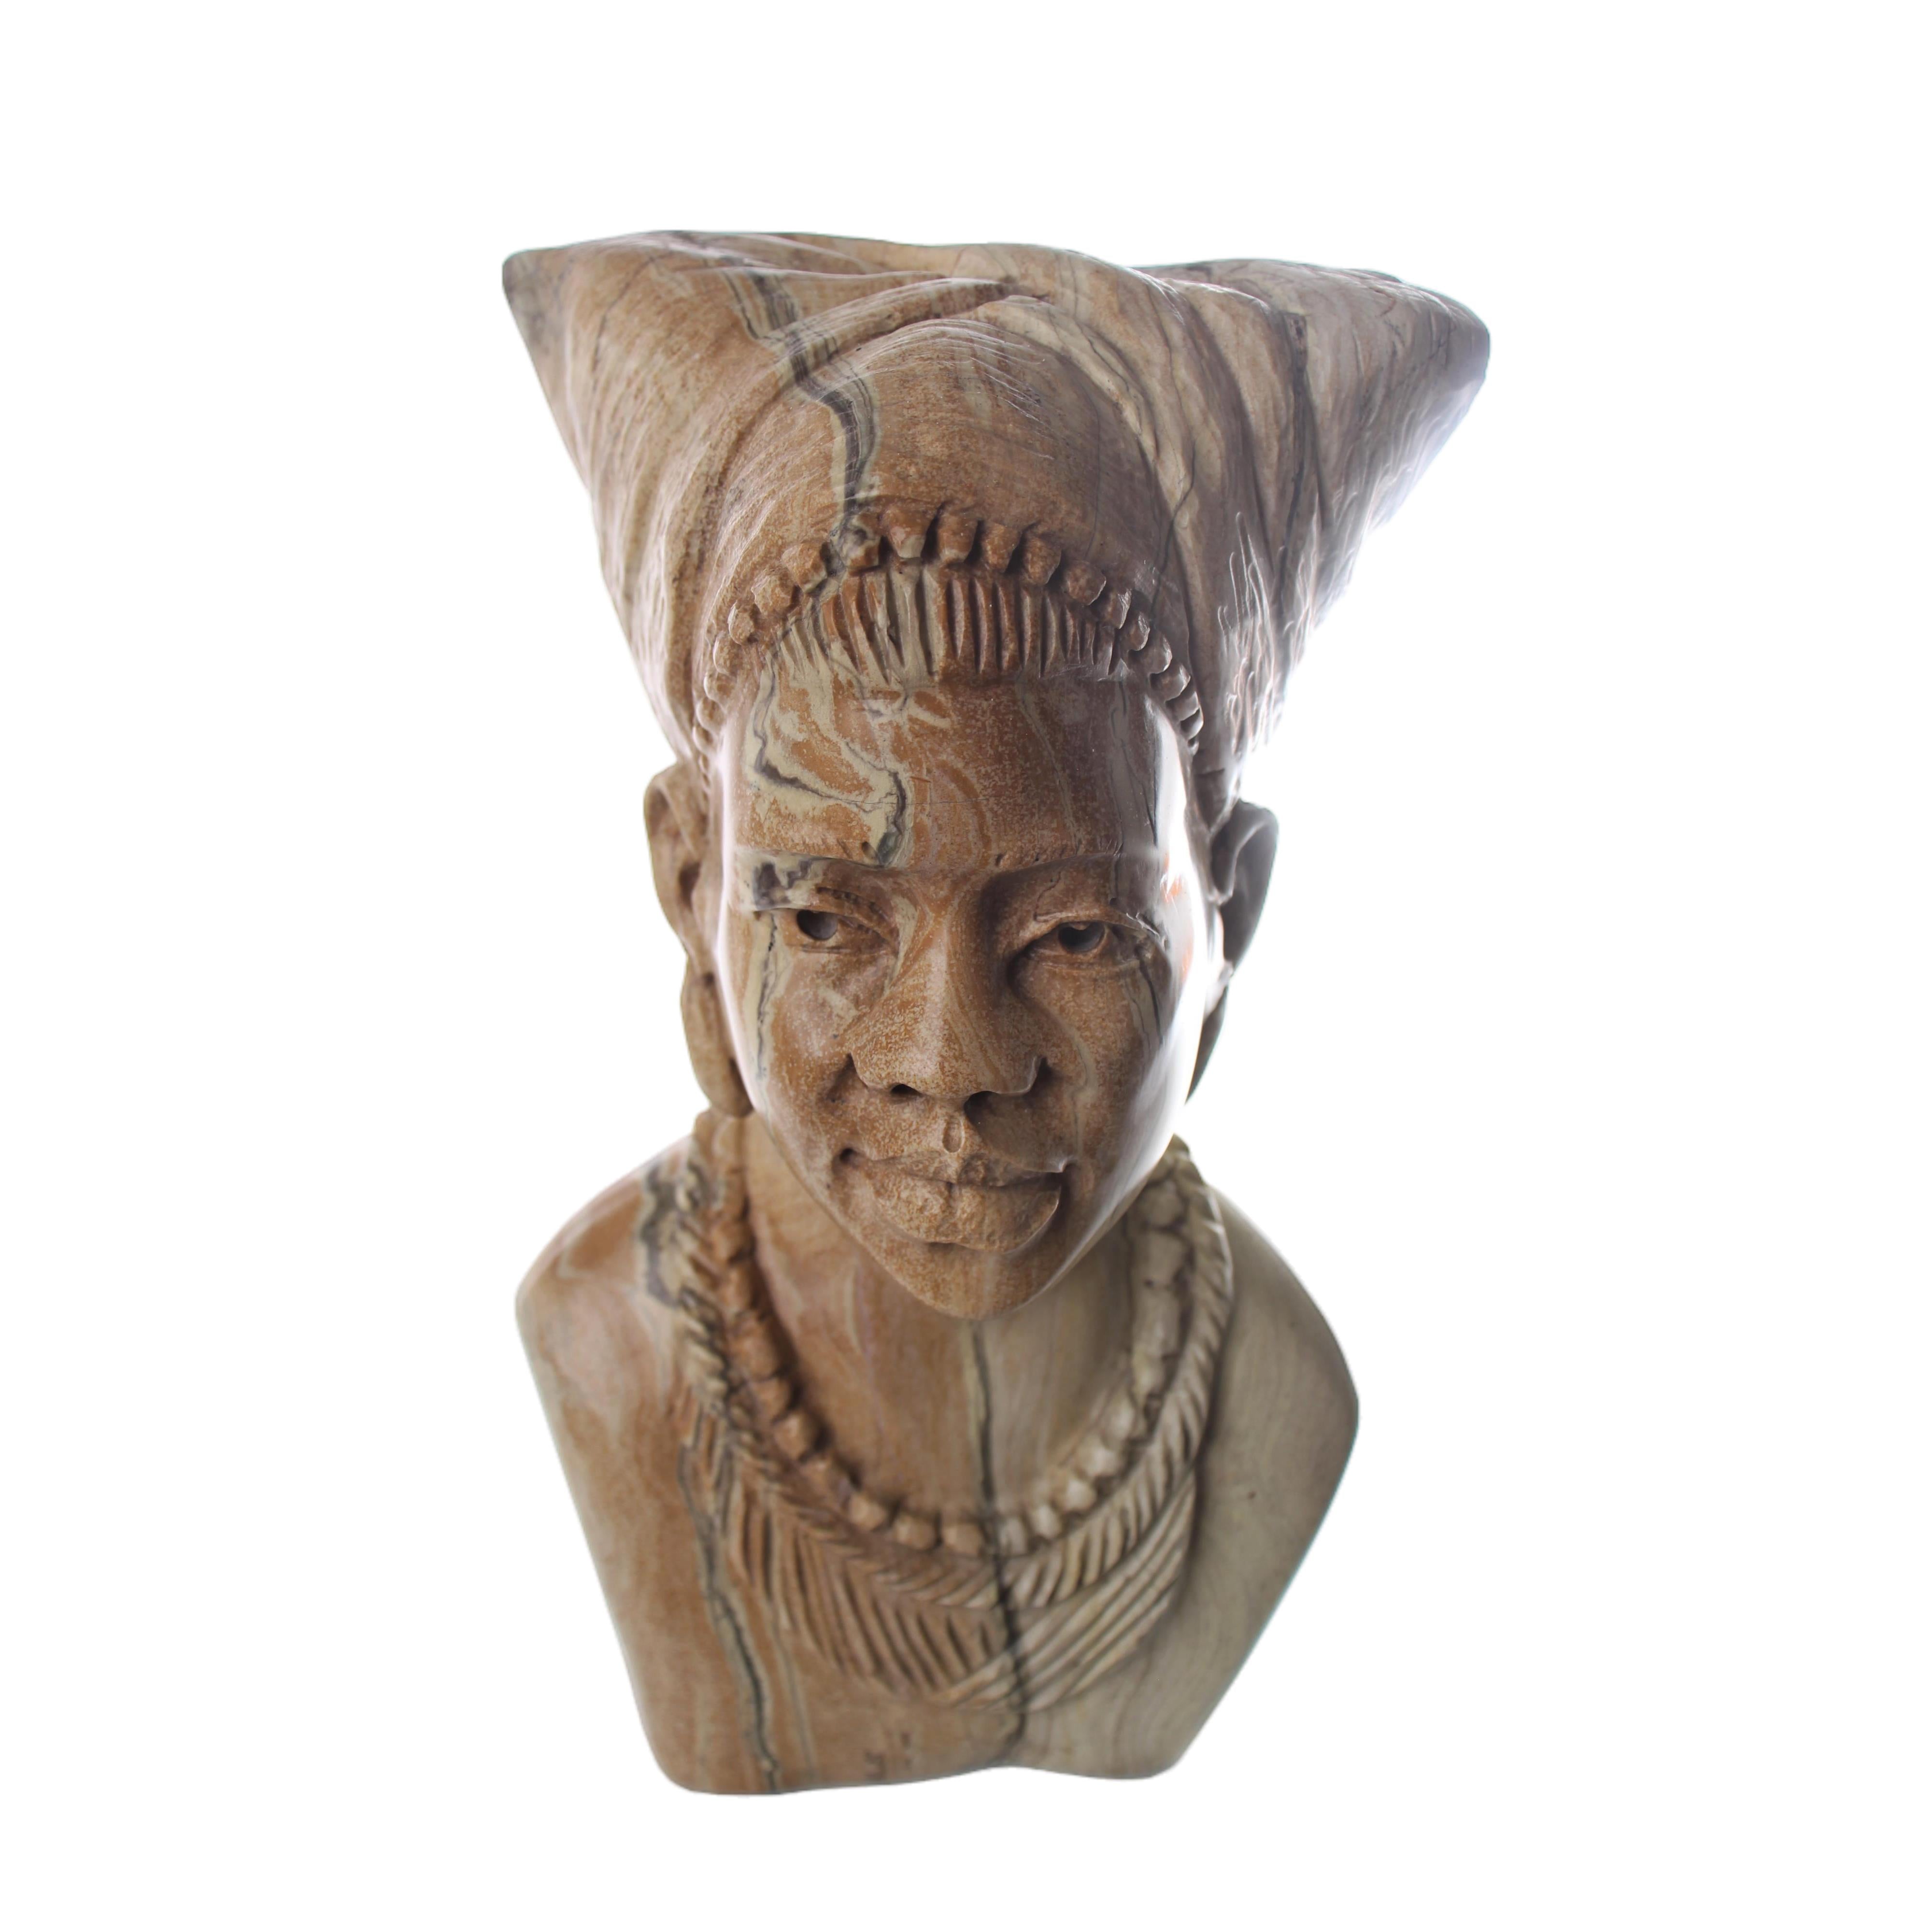 Shona Tribe Butter Jade Bust ~11.0" Tall - Busts